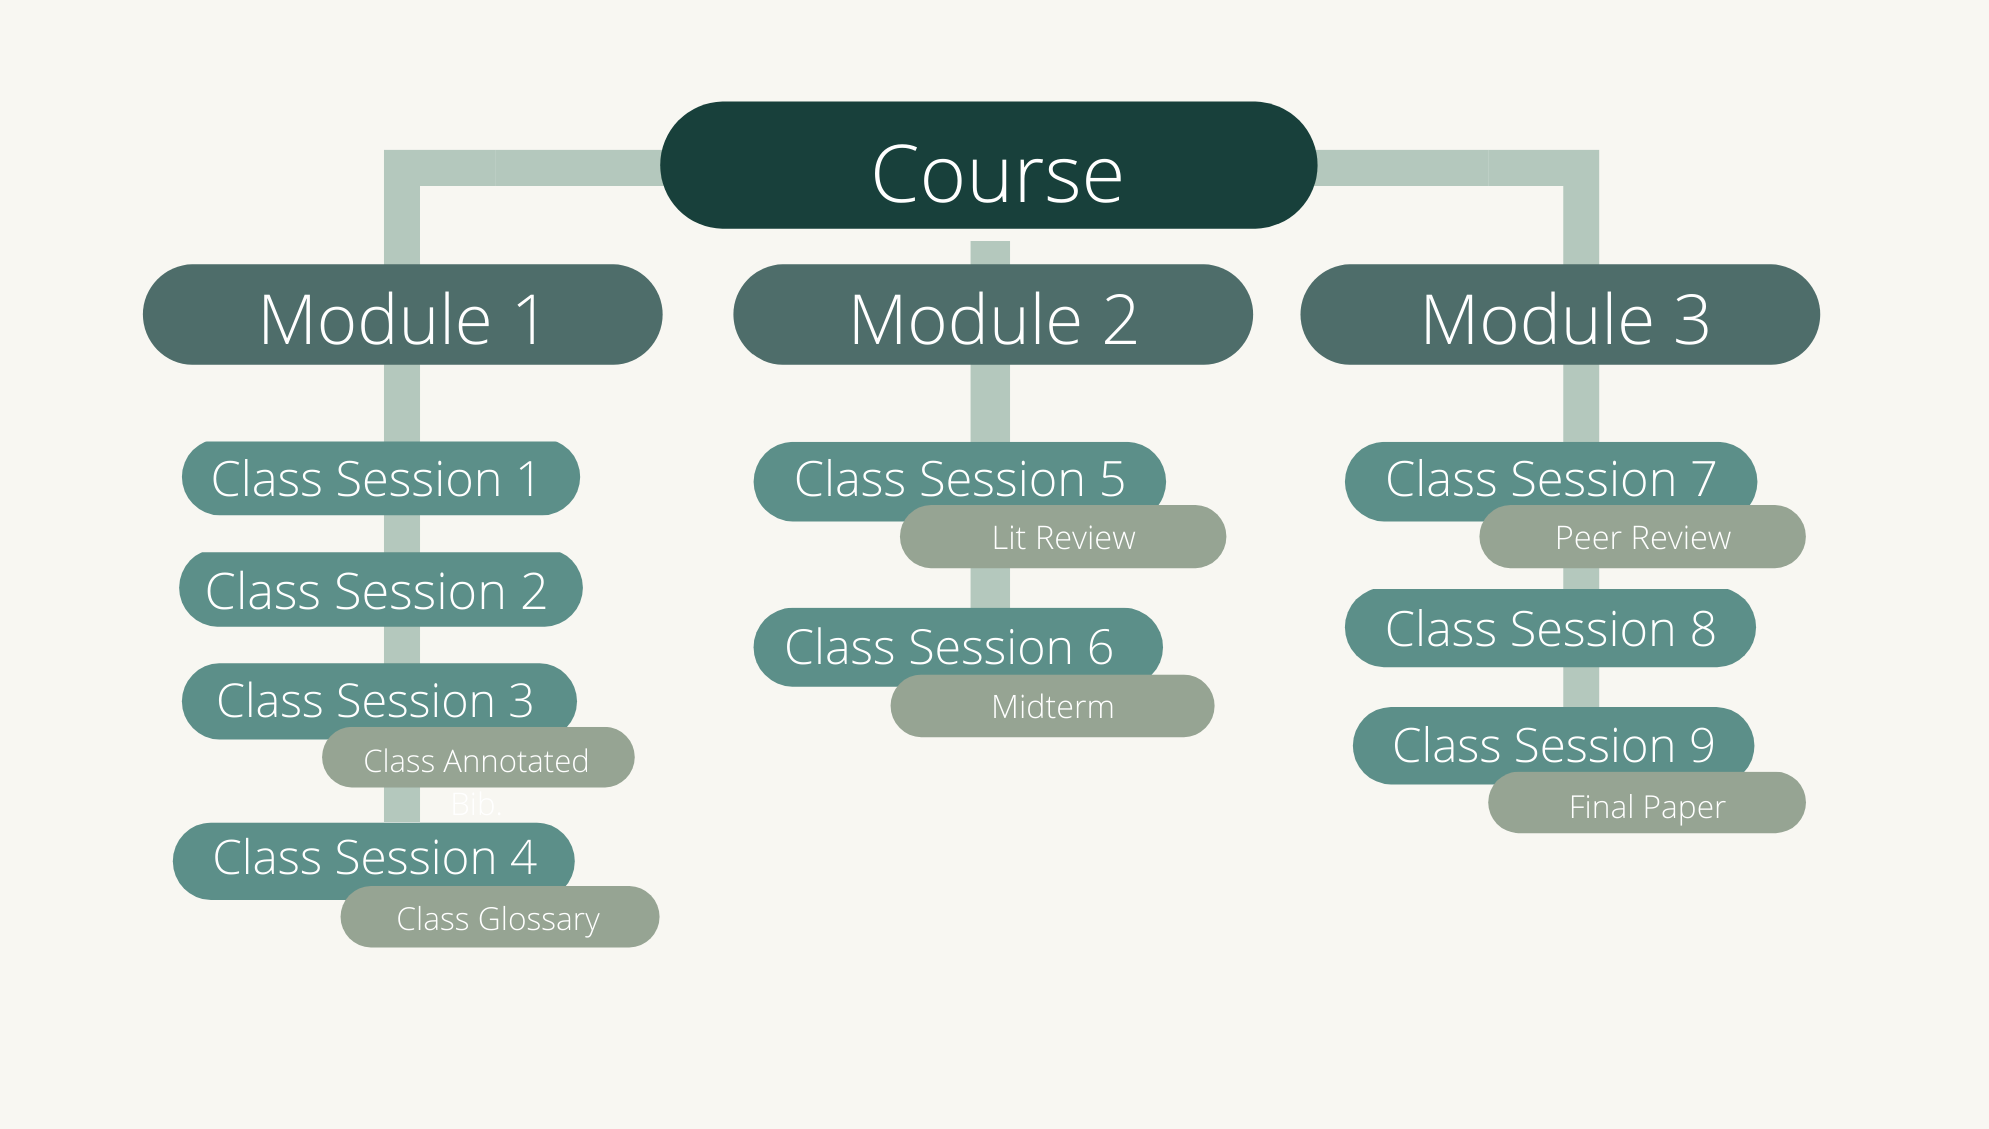 One course that branches out to 3 modules. Each module branches out to several class sessions.